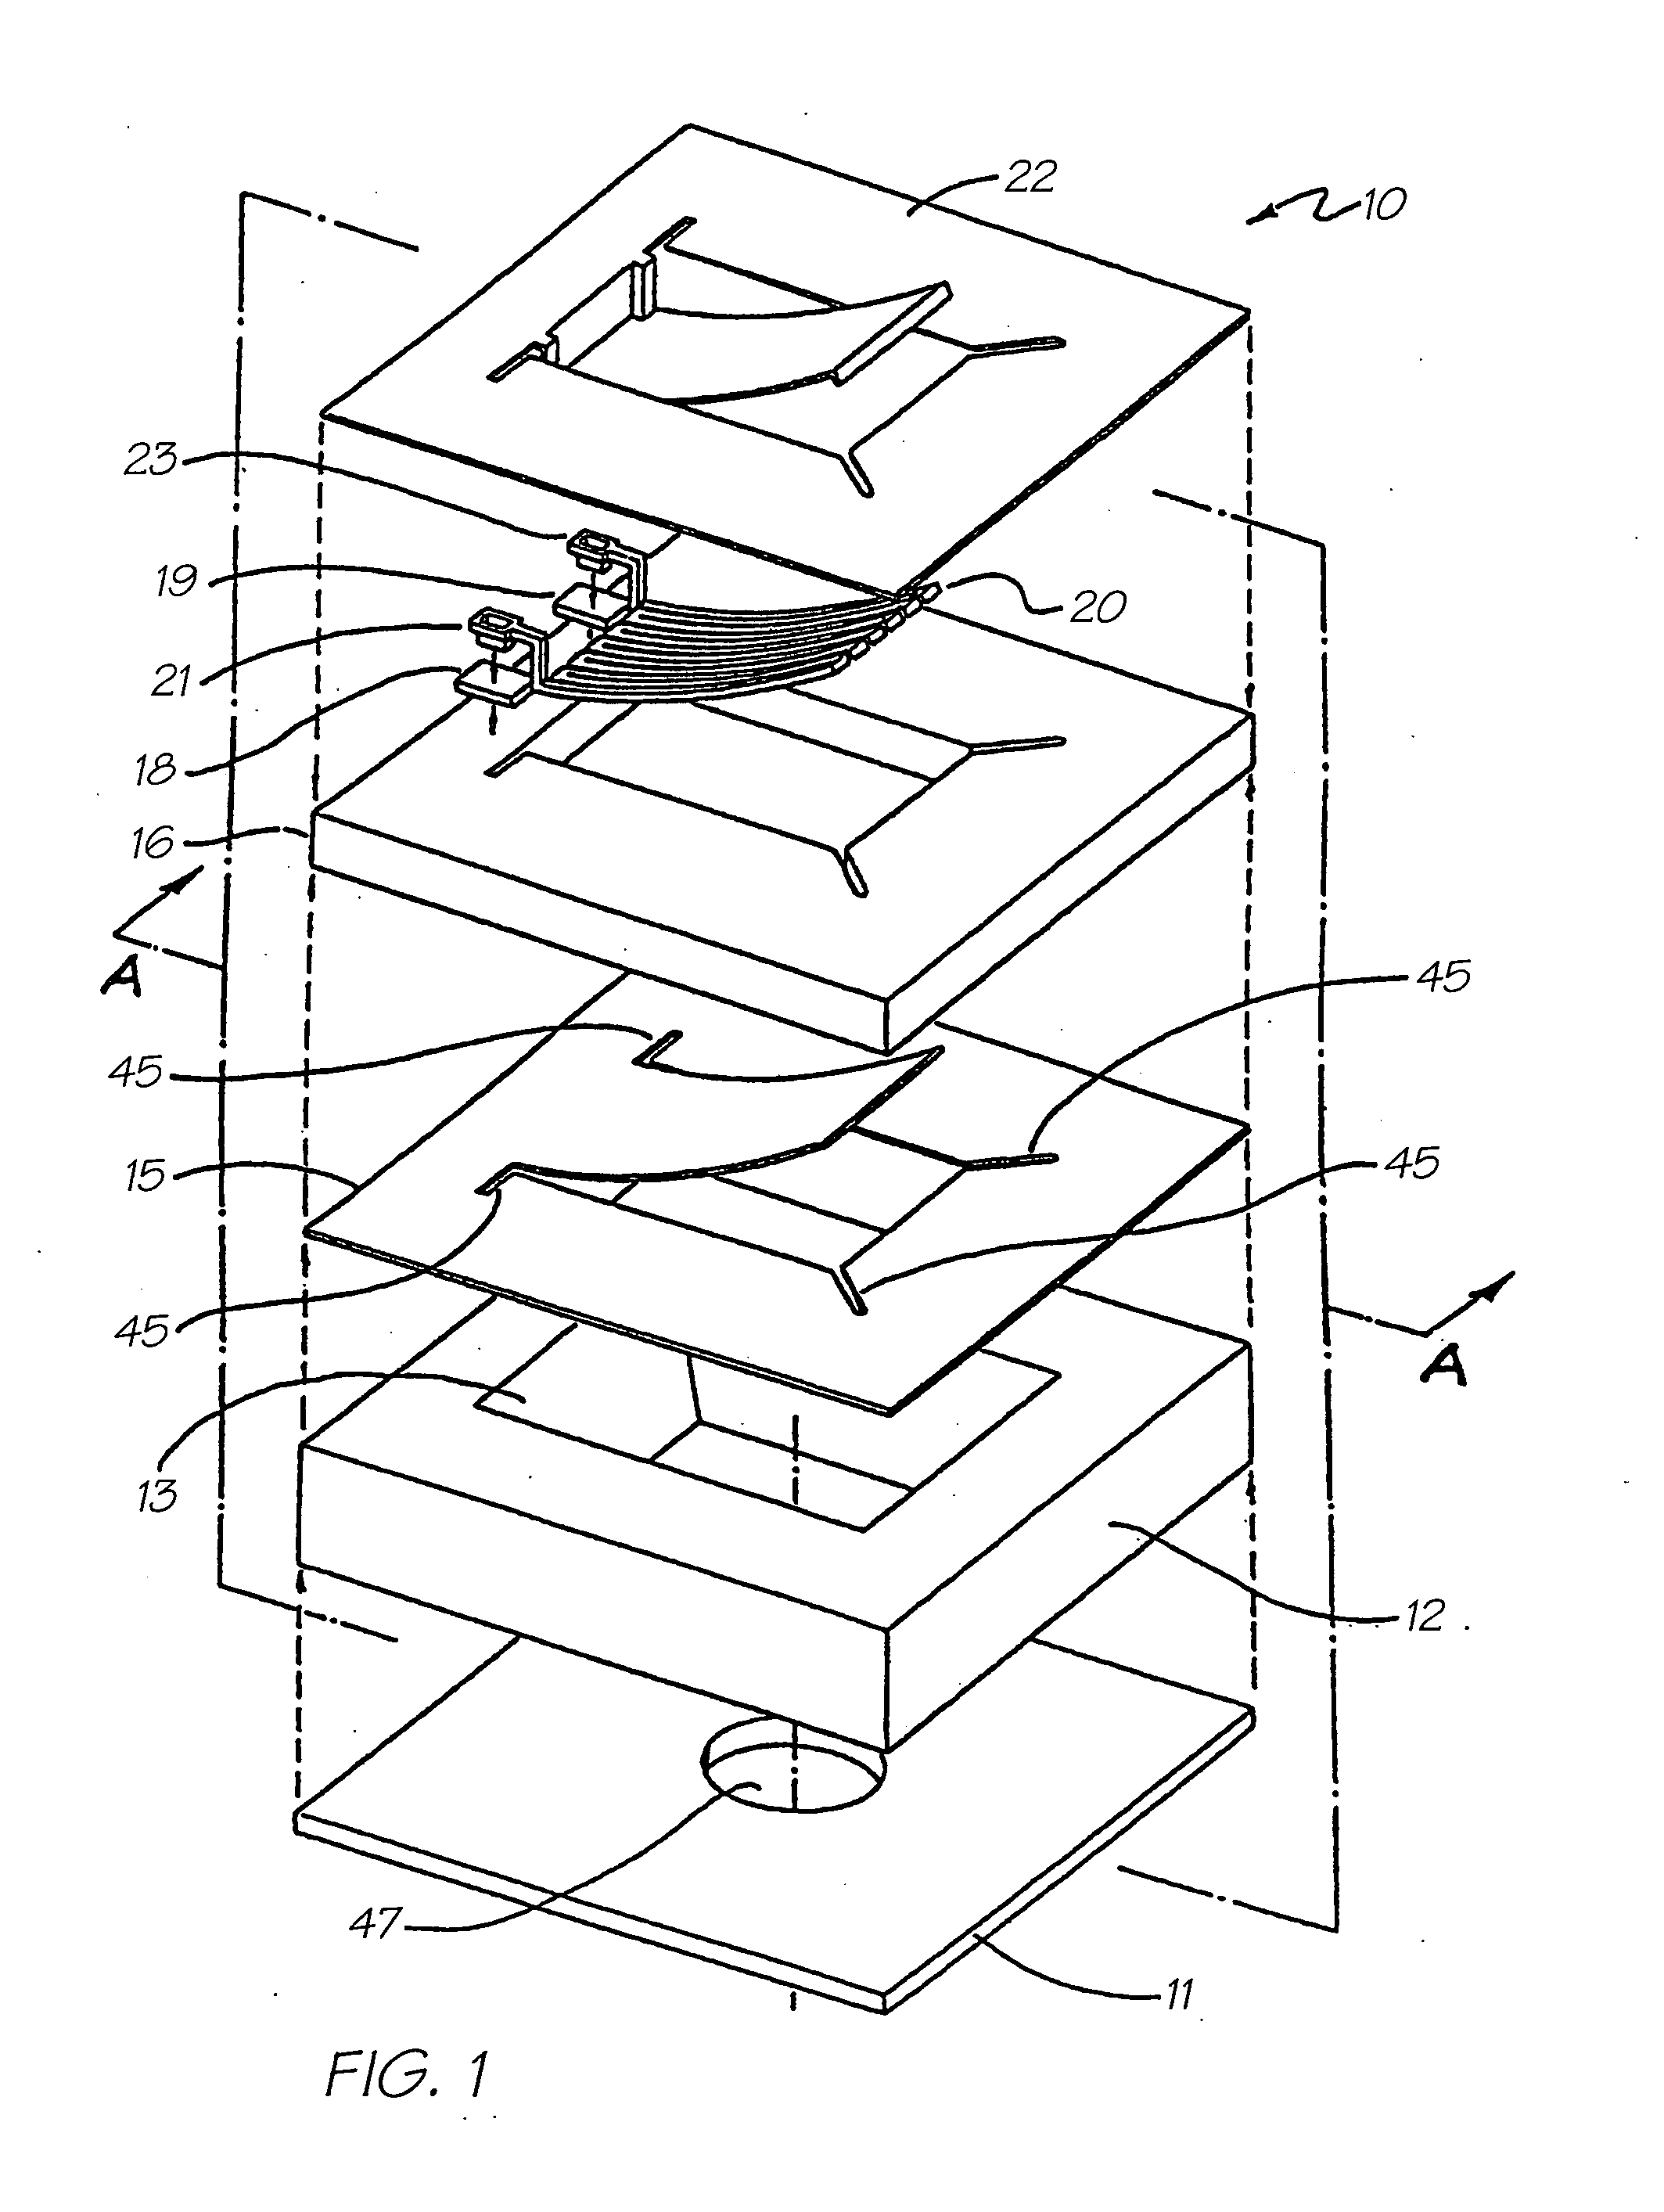 Printhead integrated circuit with low droplet ejection velocity